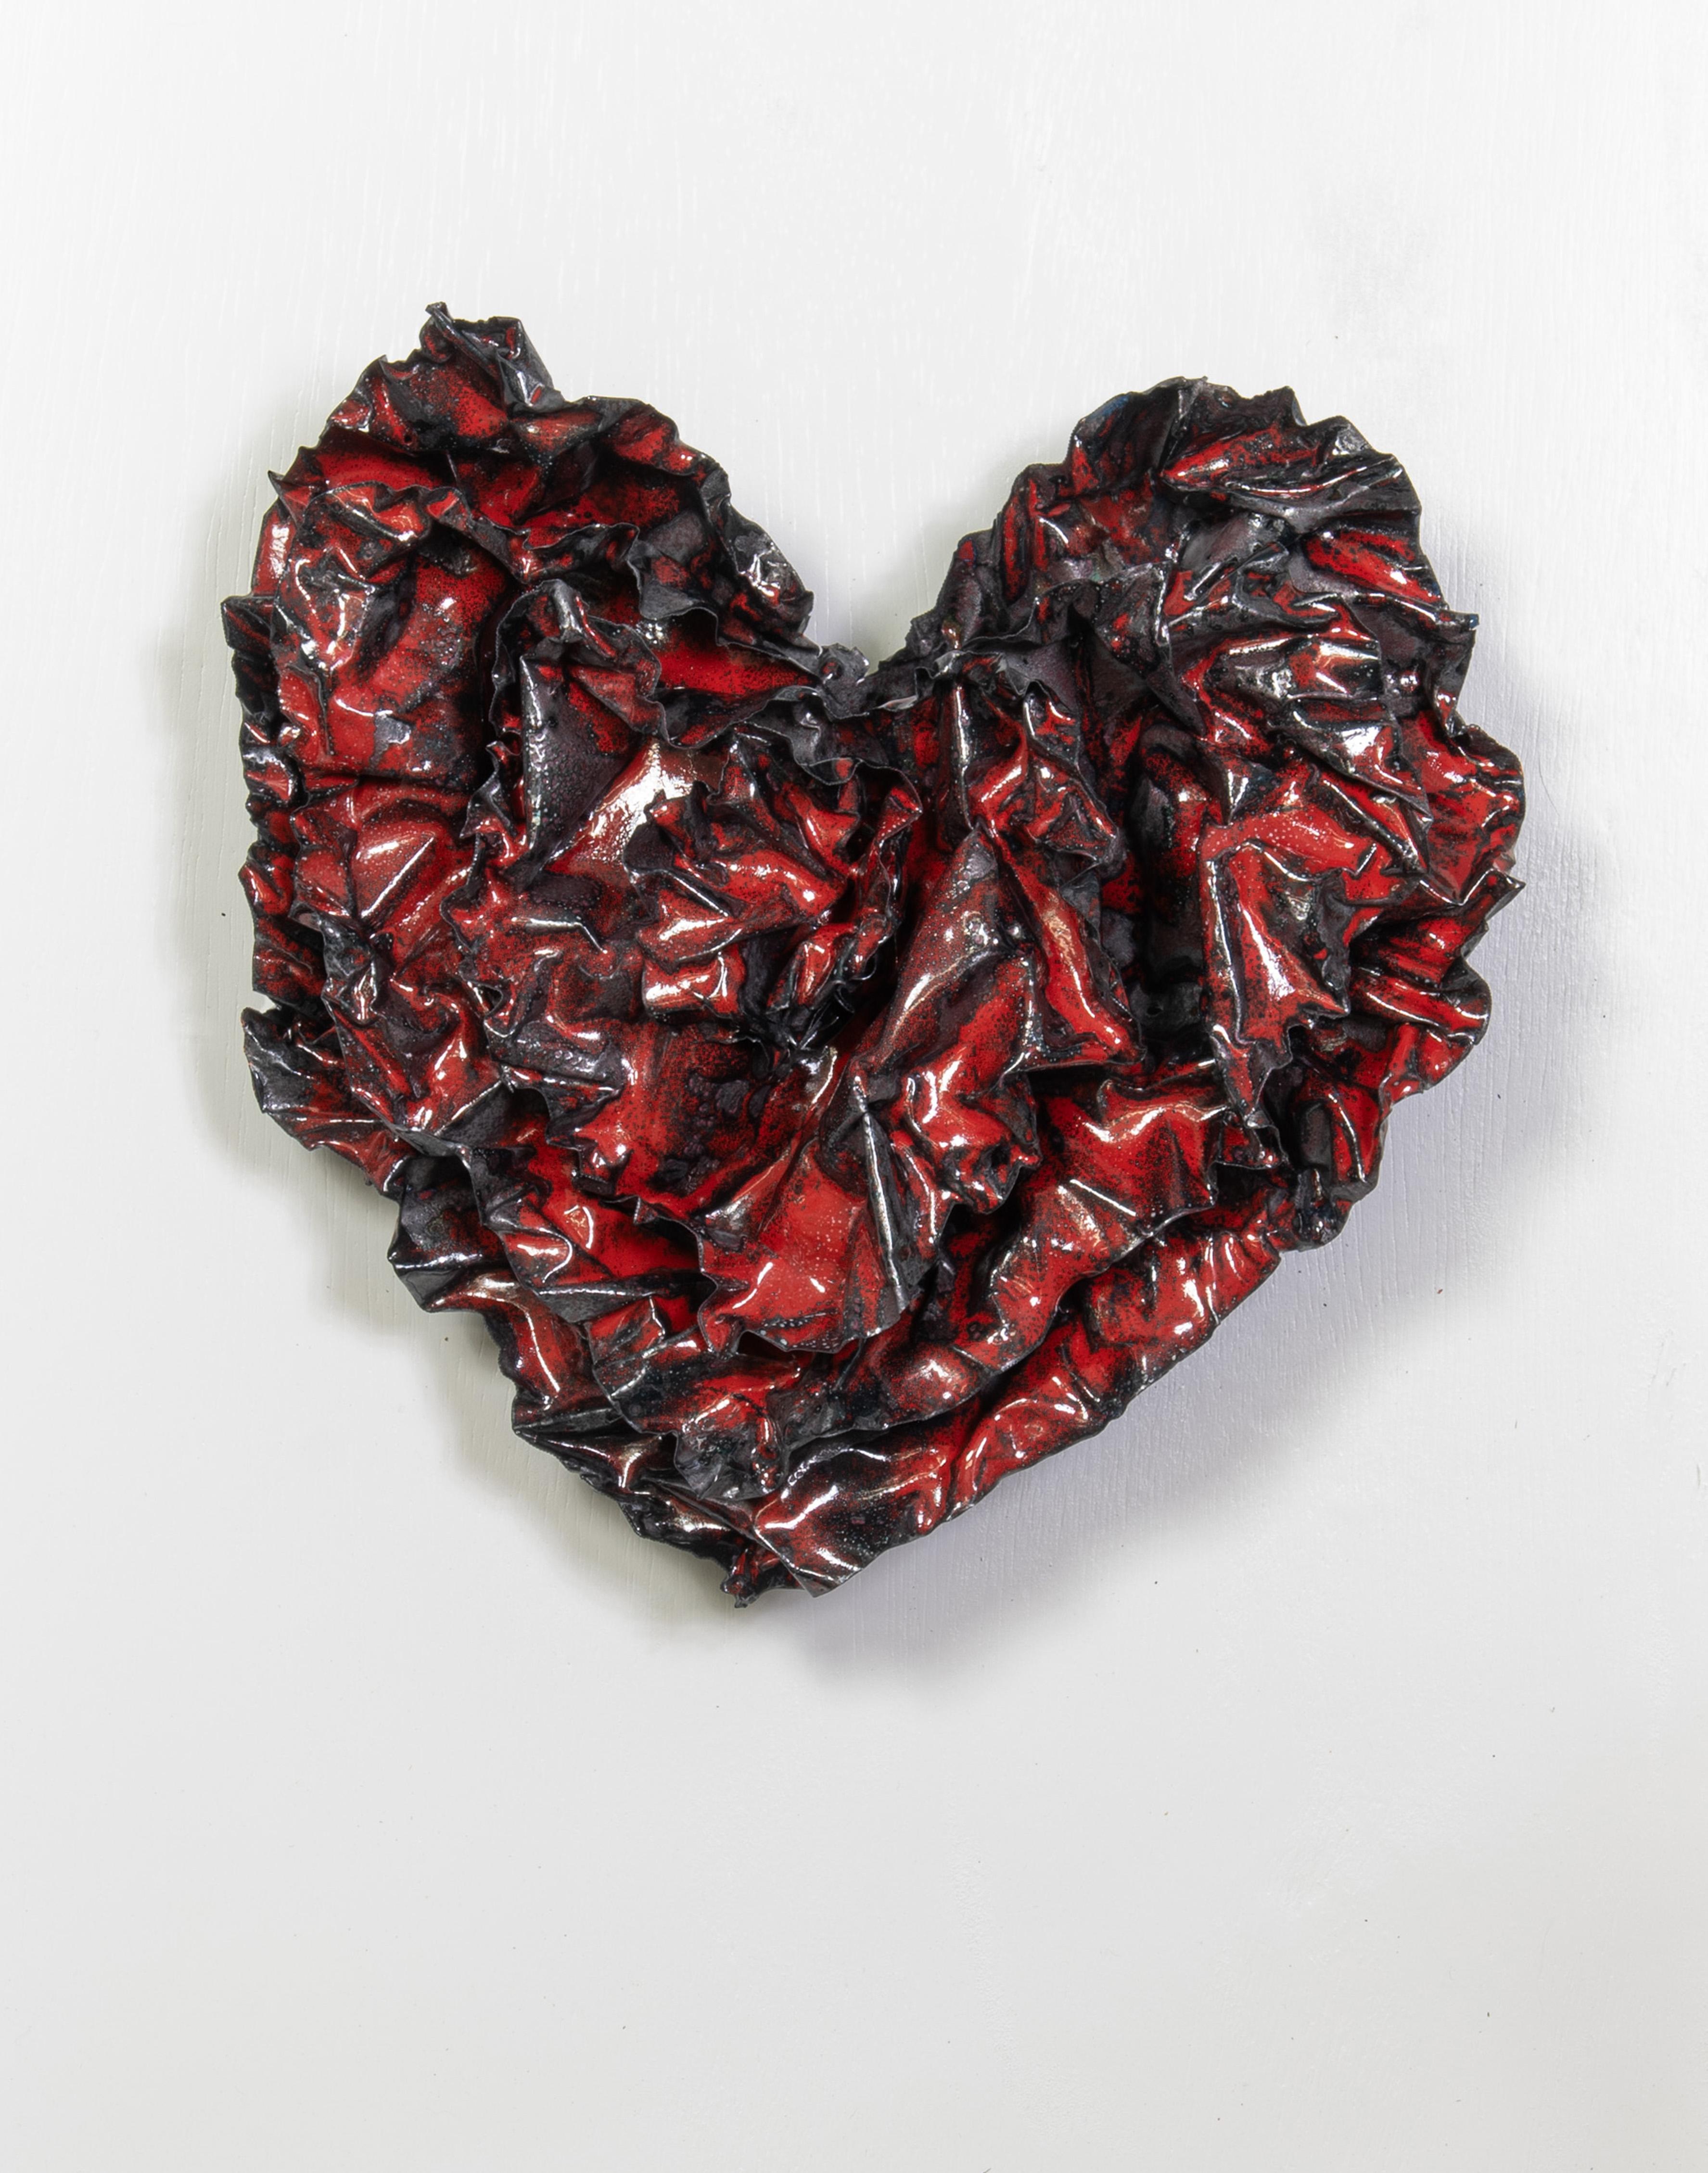 This crimson red heart is equally mixed with black glass to create a sultry sexual energy.  The heart was fired at a lower temperature to allow the black background to have a roughness juxtaposed against the red glass on the surface.  The sculpture